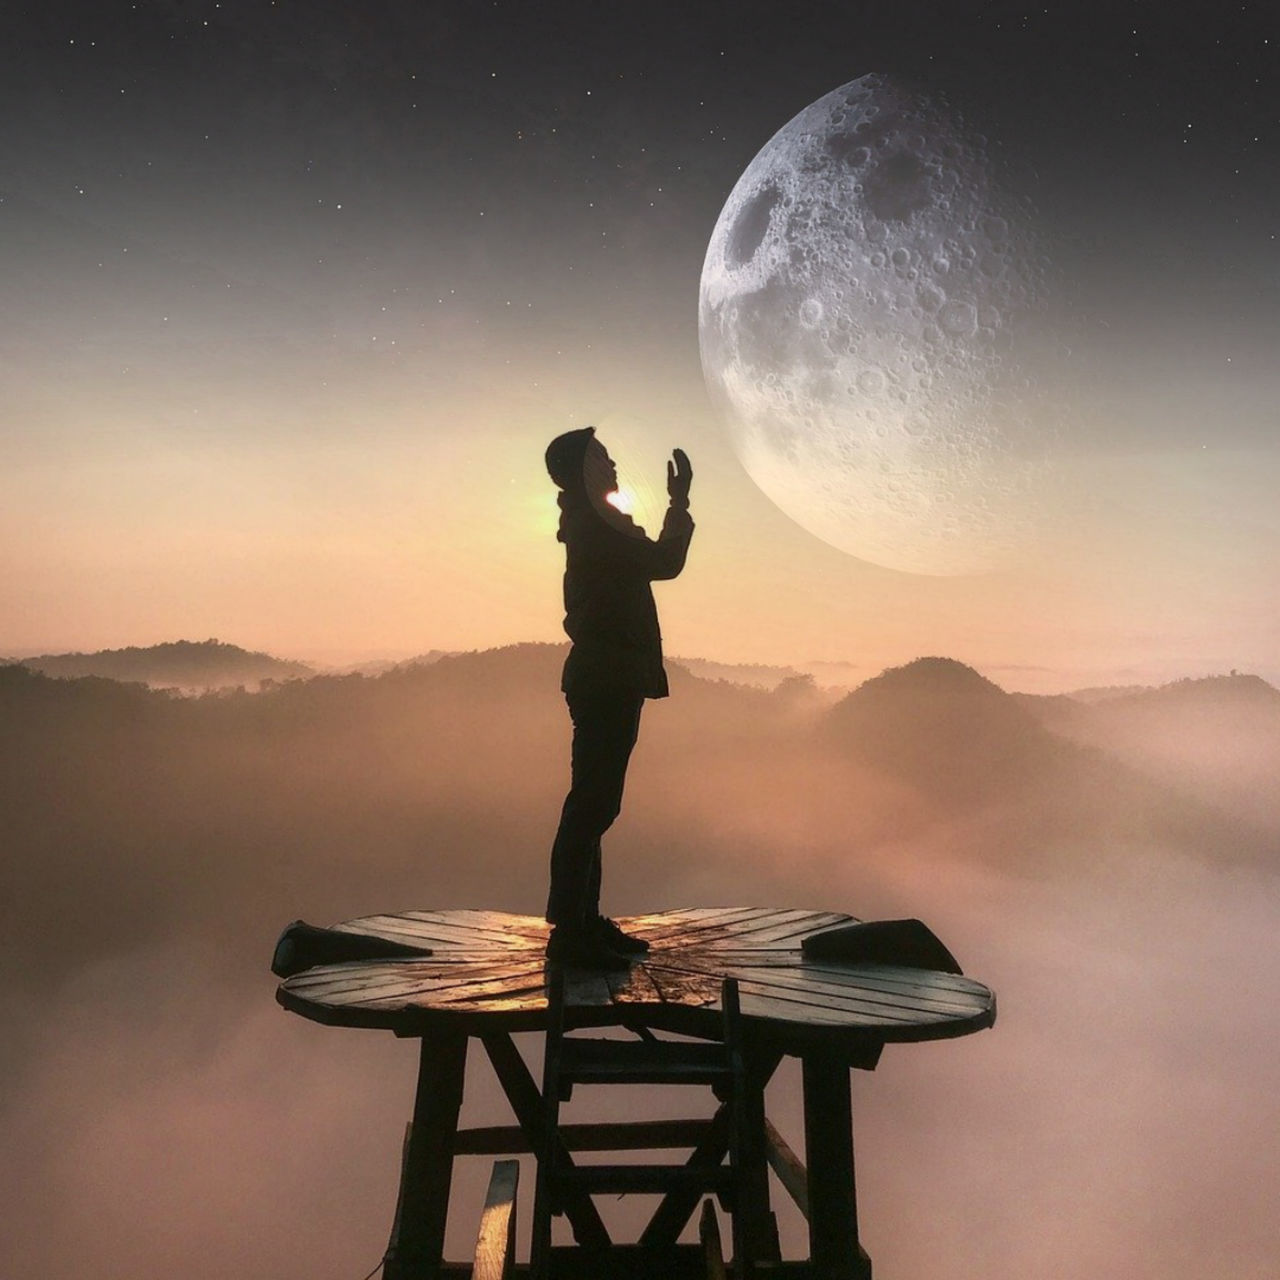 MAN STANDING ON MOUNTAIN AGAINST MOON AT SUNSET